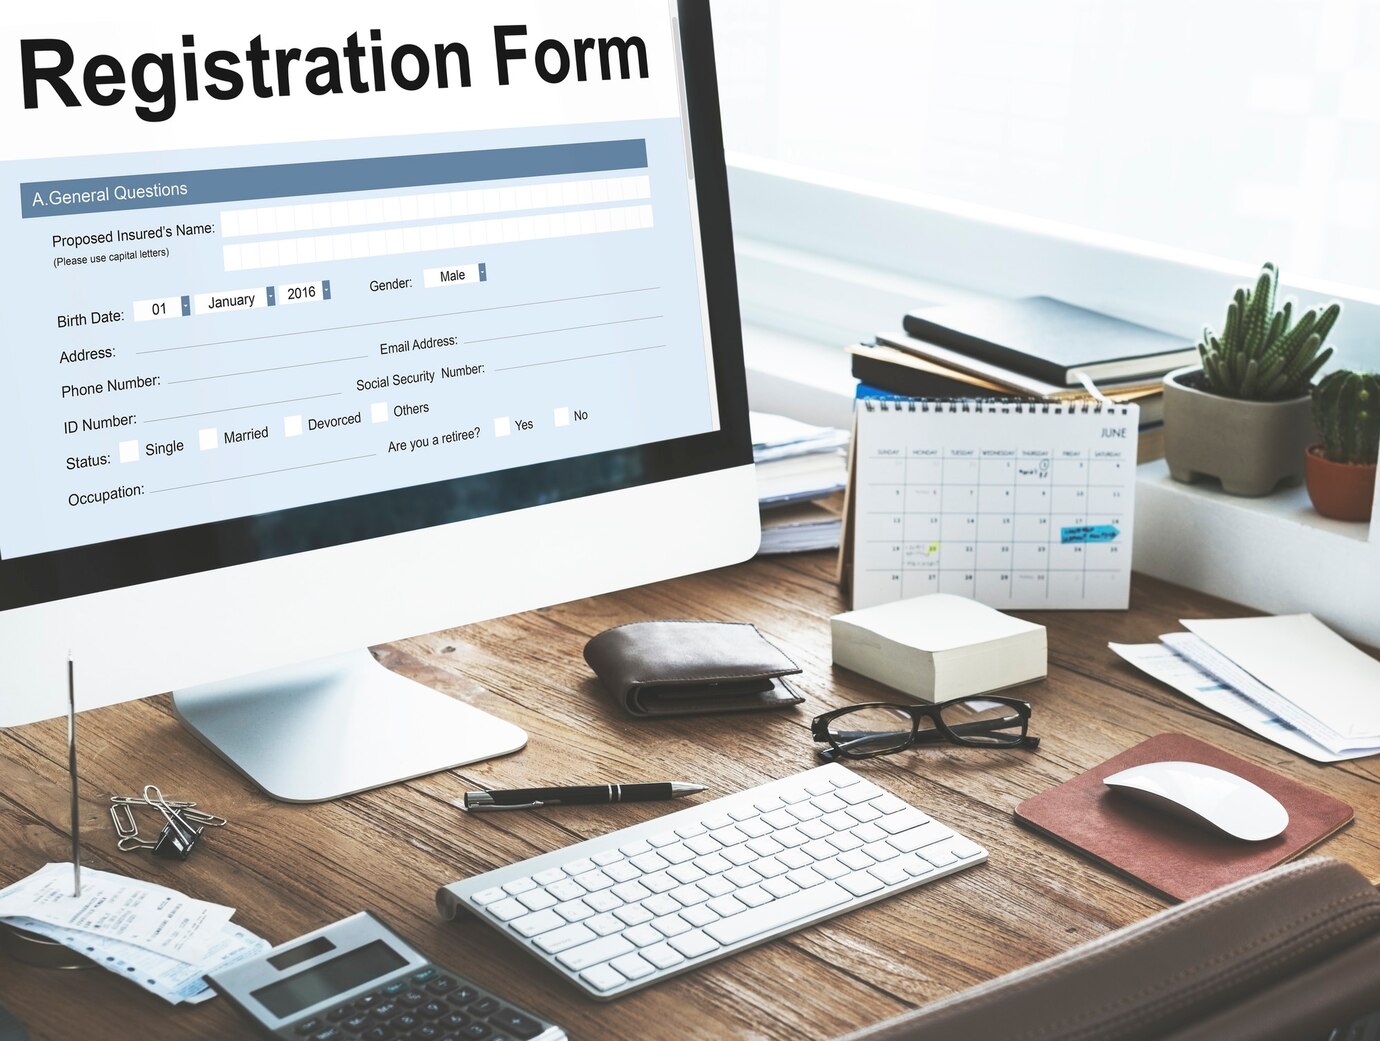 Registration application contact form. Using a page builder to create a contact form for your business